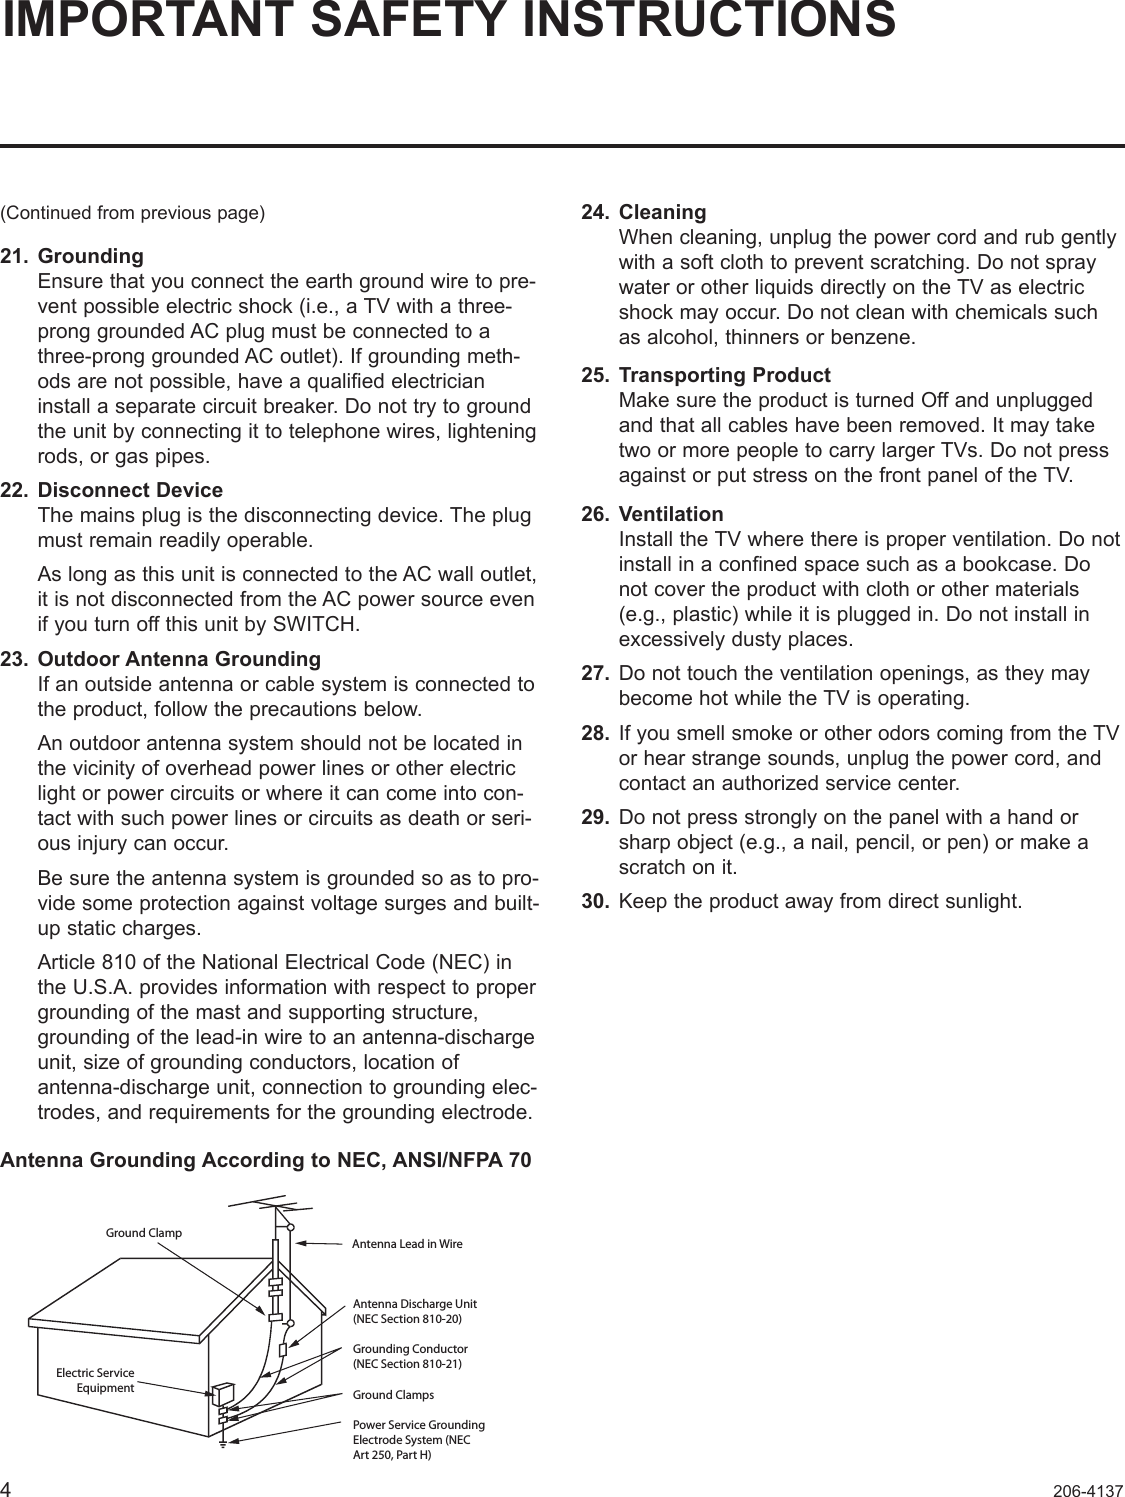 4206-4137IMPORTANT SAFETY INSTRUCTIONS(Continued from previous page)21.  Grounding Ensure that you connect the earth ground wire to pre-vent possible electric shock (i.e., a TV with a three-prong grounded AC plug must be connected to a three-prong grounded AC outlet). If grounding meth-ods are not possible, have a qualified electrician install a separate circuit breaker. Do not try to ground the unit by connecting it to telephone wires, lightening rods, or gas pipes.22.  Disconnect Device The mains plug is the disconnecting device. The plug must remain readily operable.  As long as this unit is connected to the AC wall outlet, it is not disconnected from the AC power source even if you turn off this unit by SWITCH.23.  Outdoor Antenna Grounding If an outside antenna or cable system is connected to the product, follow the precautions below.   An outdoor antenna system should not be located in the vicinity of overhead power lines or other electric light or power circuits or where it can come into con-tact with such power lines or circuits as death or seri-ous injury can occur.  Be sure the antenna system is grounded so as to pro-vide some protection against voltage surges and built-up static charges.   Article 810 of the National Electrical Code (NEC) in the U.S.A. provides information with respect to proper grounding of the mast and supporting structure, grounding of the lead-in wire to an antenna-discharge unit, size of grounding conductors, location of  antenna-discharge unit, connection to grounding elec-trodes, and requirements for the grounding electrode. Antenna Grounding According to NEC, ANSI/NFPA 7024.  Cleaning When cleaning, unplug the power cord and rub gently with a soft cloth to prevent scratching. Do not spray water or other liquids directly on the TV as electric shock may occur. Do not clean with chemicals such as alcohol, thinners or benzene.  25.  Transporting Product Make sure the product is turned Off and unplugged and that all cables have been removed. It may take two or more people to carry larger TVs. Do not press against or put stress on the front panel of the TV. 26.  Ventilation Install the TV where there is proper ventilation. Do not install in a confined space such as a bookcase. Do not cover the product with cloth or other materials (e.g., plastic) while it is plugged in. Do not install in excessively dusty places.   27.  Do not touch the ventilation openings, as they may become hot while the TV is operating.  28.  If you smell smoke or other odors coming from the TV or hear strange sounds, unplug the power cord, and  contact an authorized service center.29.  Do not press strongly on the panel with a hand or sharp object (e.g., a nail, pencil, or pen) or make a scratch on it.30.  Keep the product away from direct sunlight.Antenna Lead in WireAntenna Discharge Unit(NEC Section 810-20)Grounding Conductor(NEC Section 810-21)Ground ClampsPower Service GroundingElectrode System (NECArt 250, Part H) Ground ClampElectric ServiceEquipment